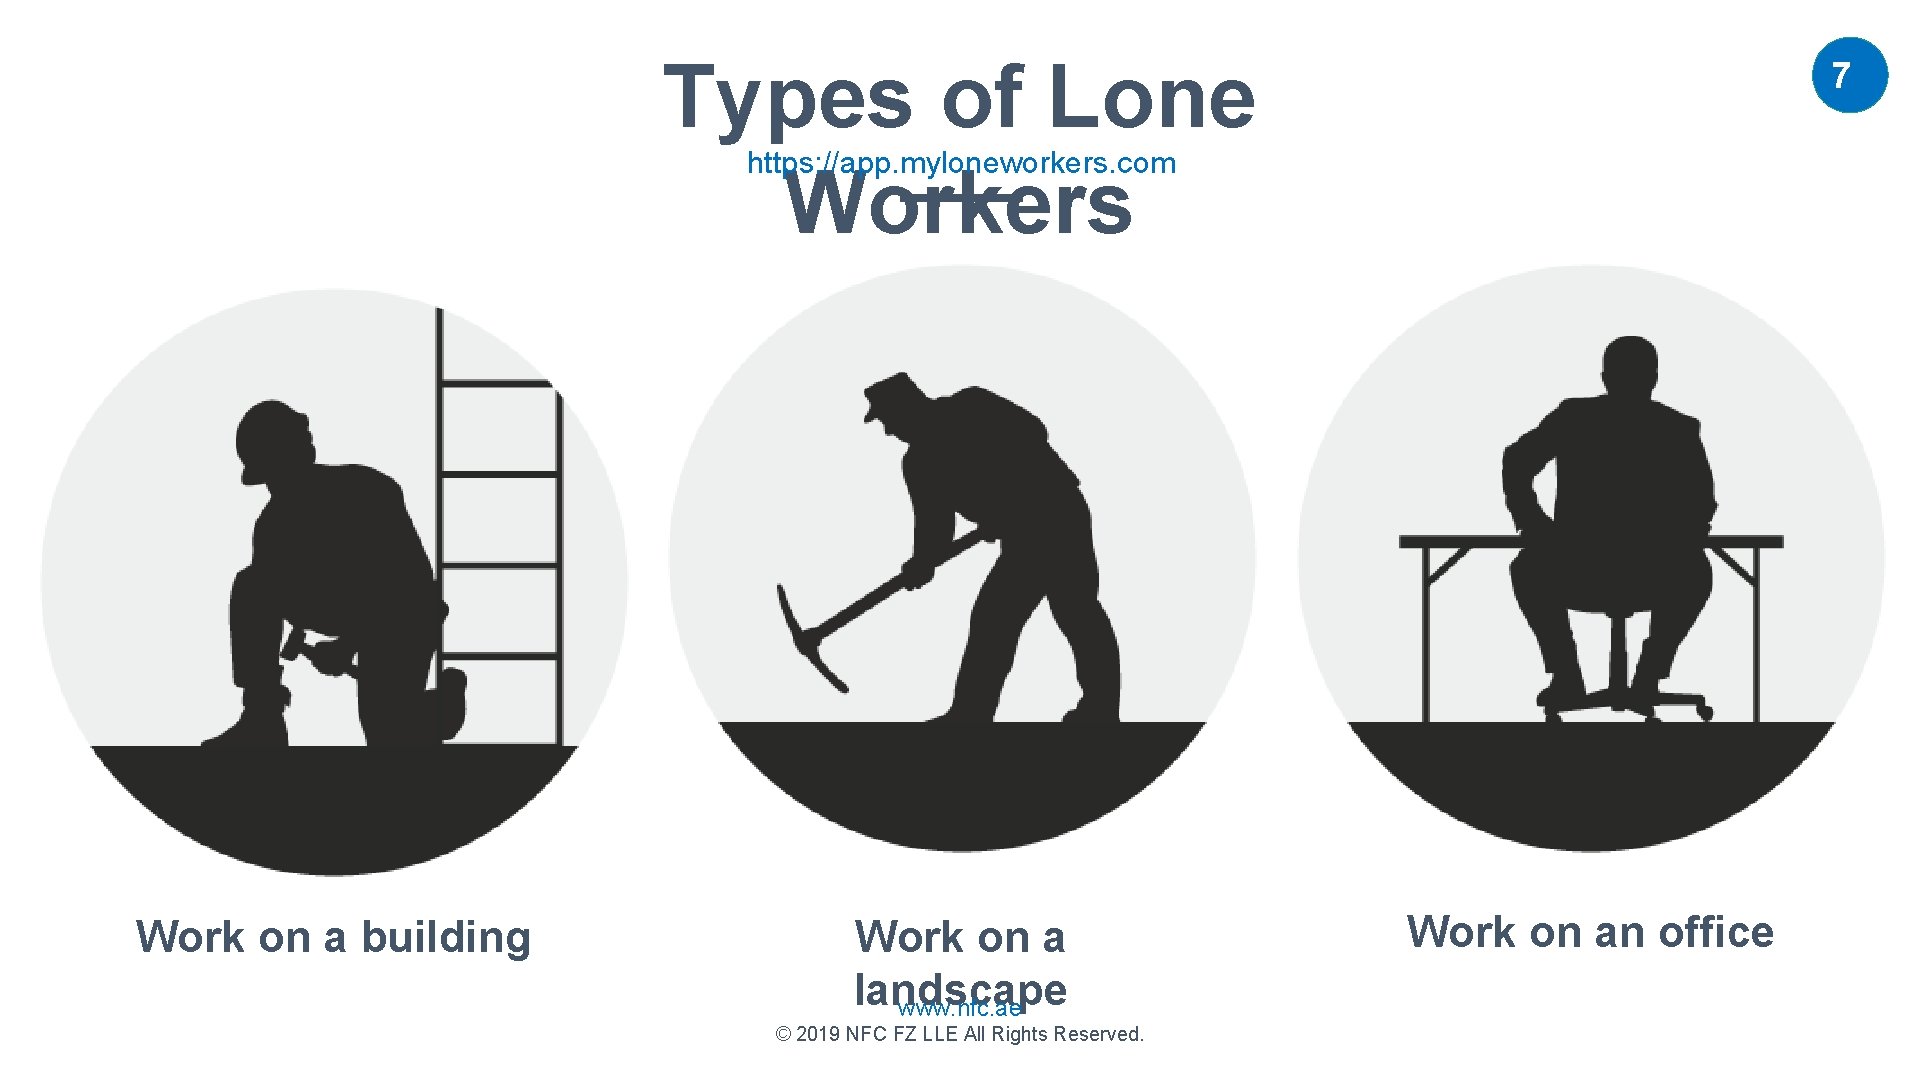 Types of Lone Workers 7 https: //app. myloneworkers. com Work on a building Work